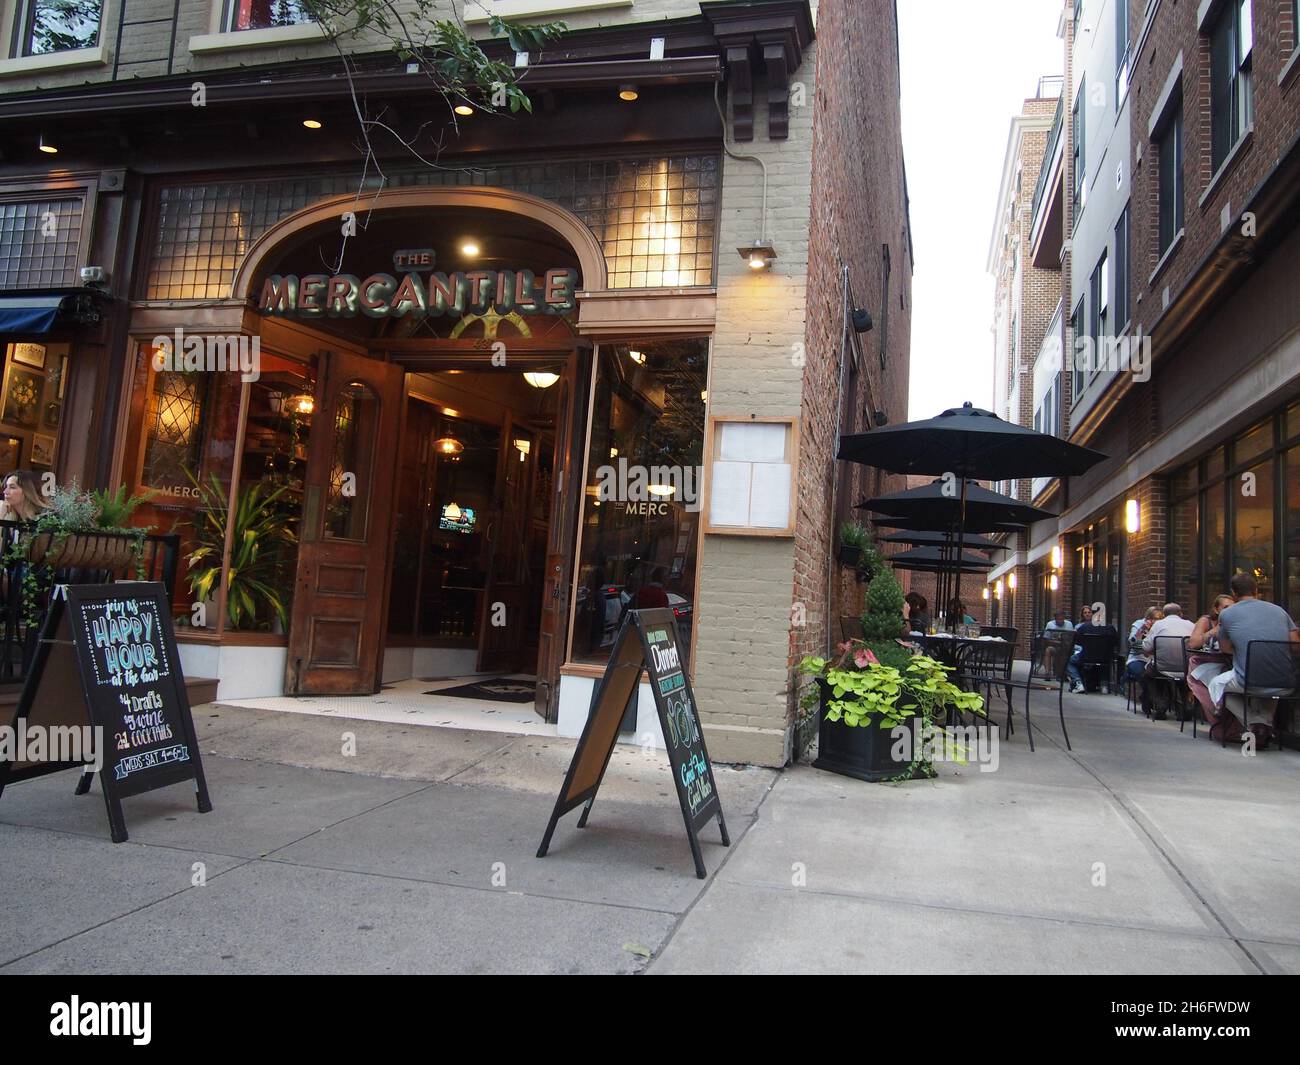 The Mercantile Restaurant, a/k/a The Merc, on Broadway in Saratoga Springs, New York, USA, 2021 © Katharine Andriotis Stock Photo